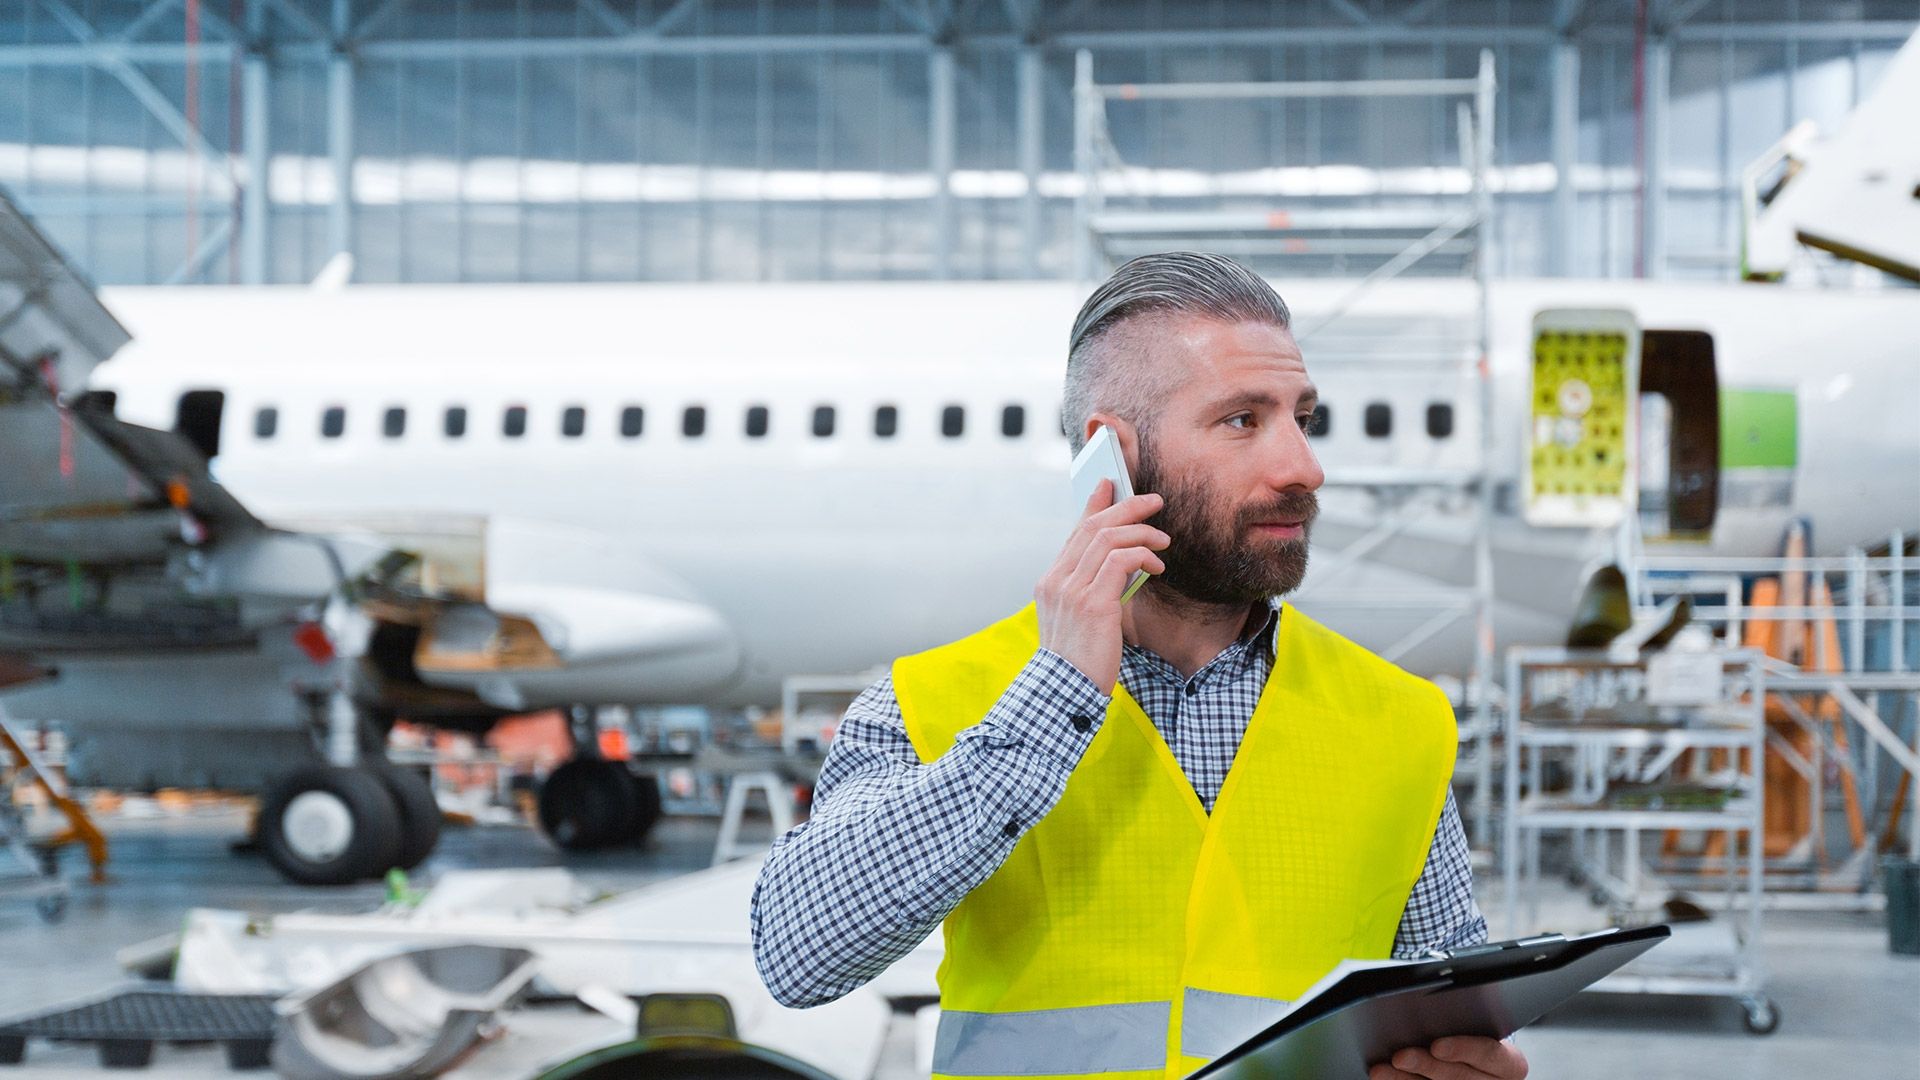 Source Aircraft engineer talking on mobile phone in a hangar